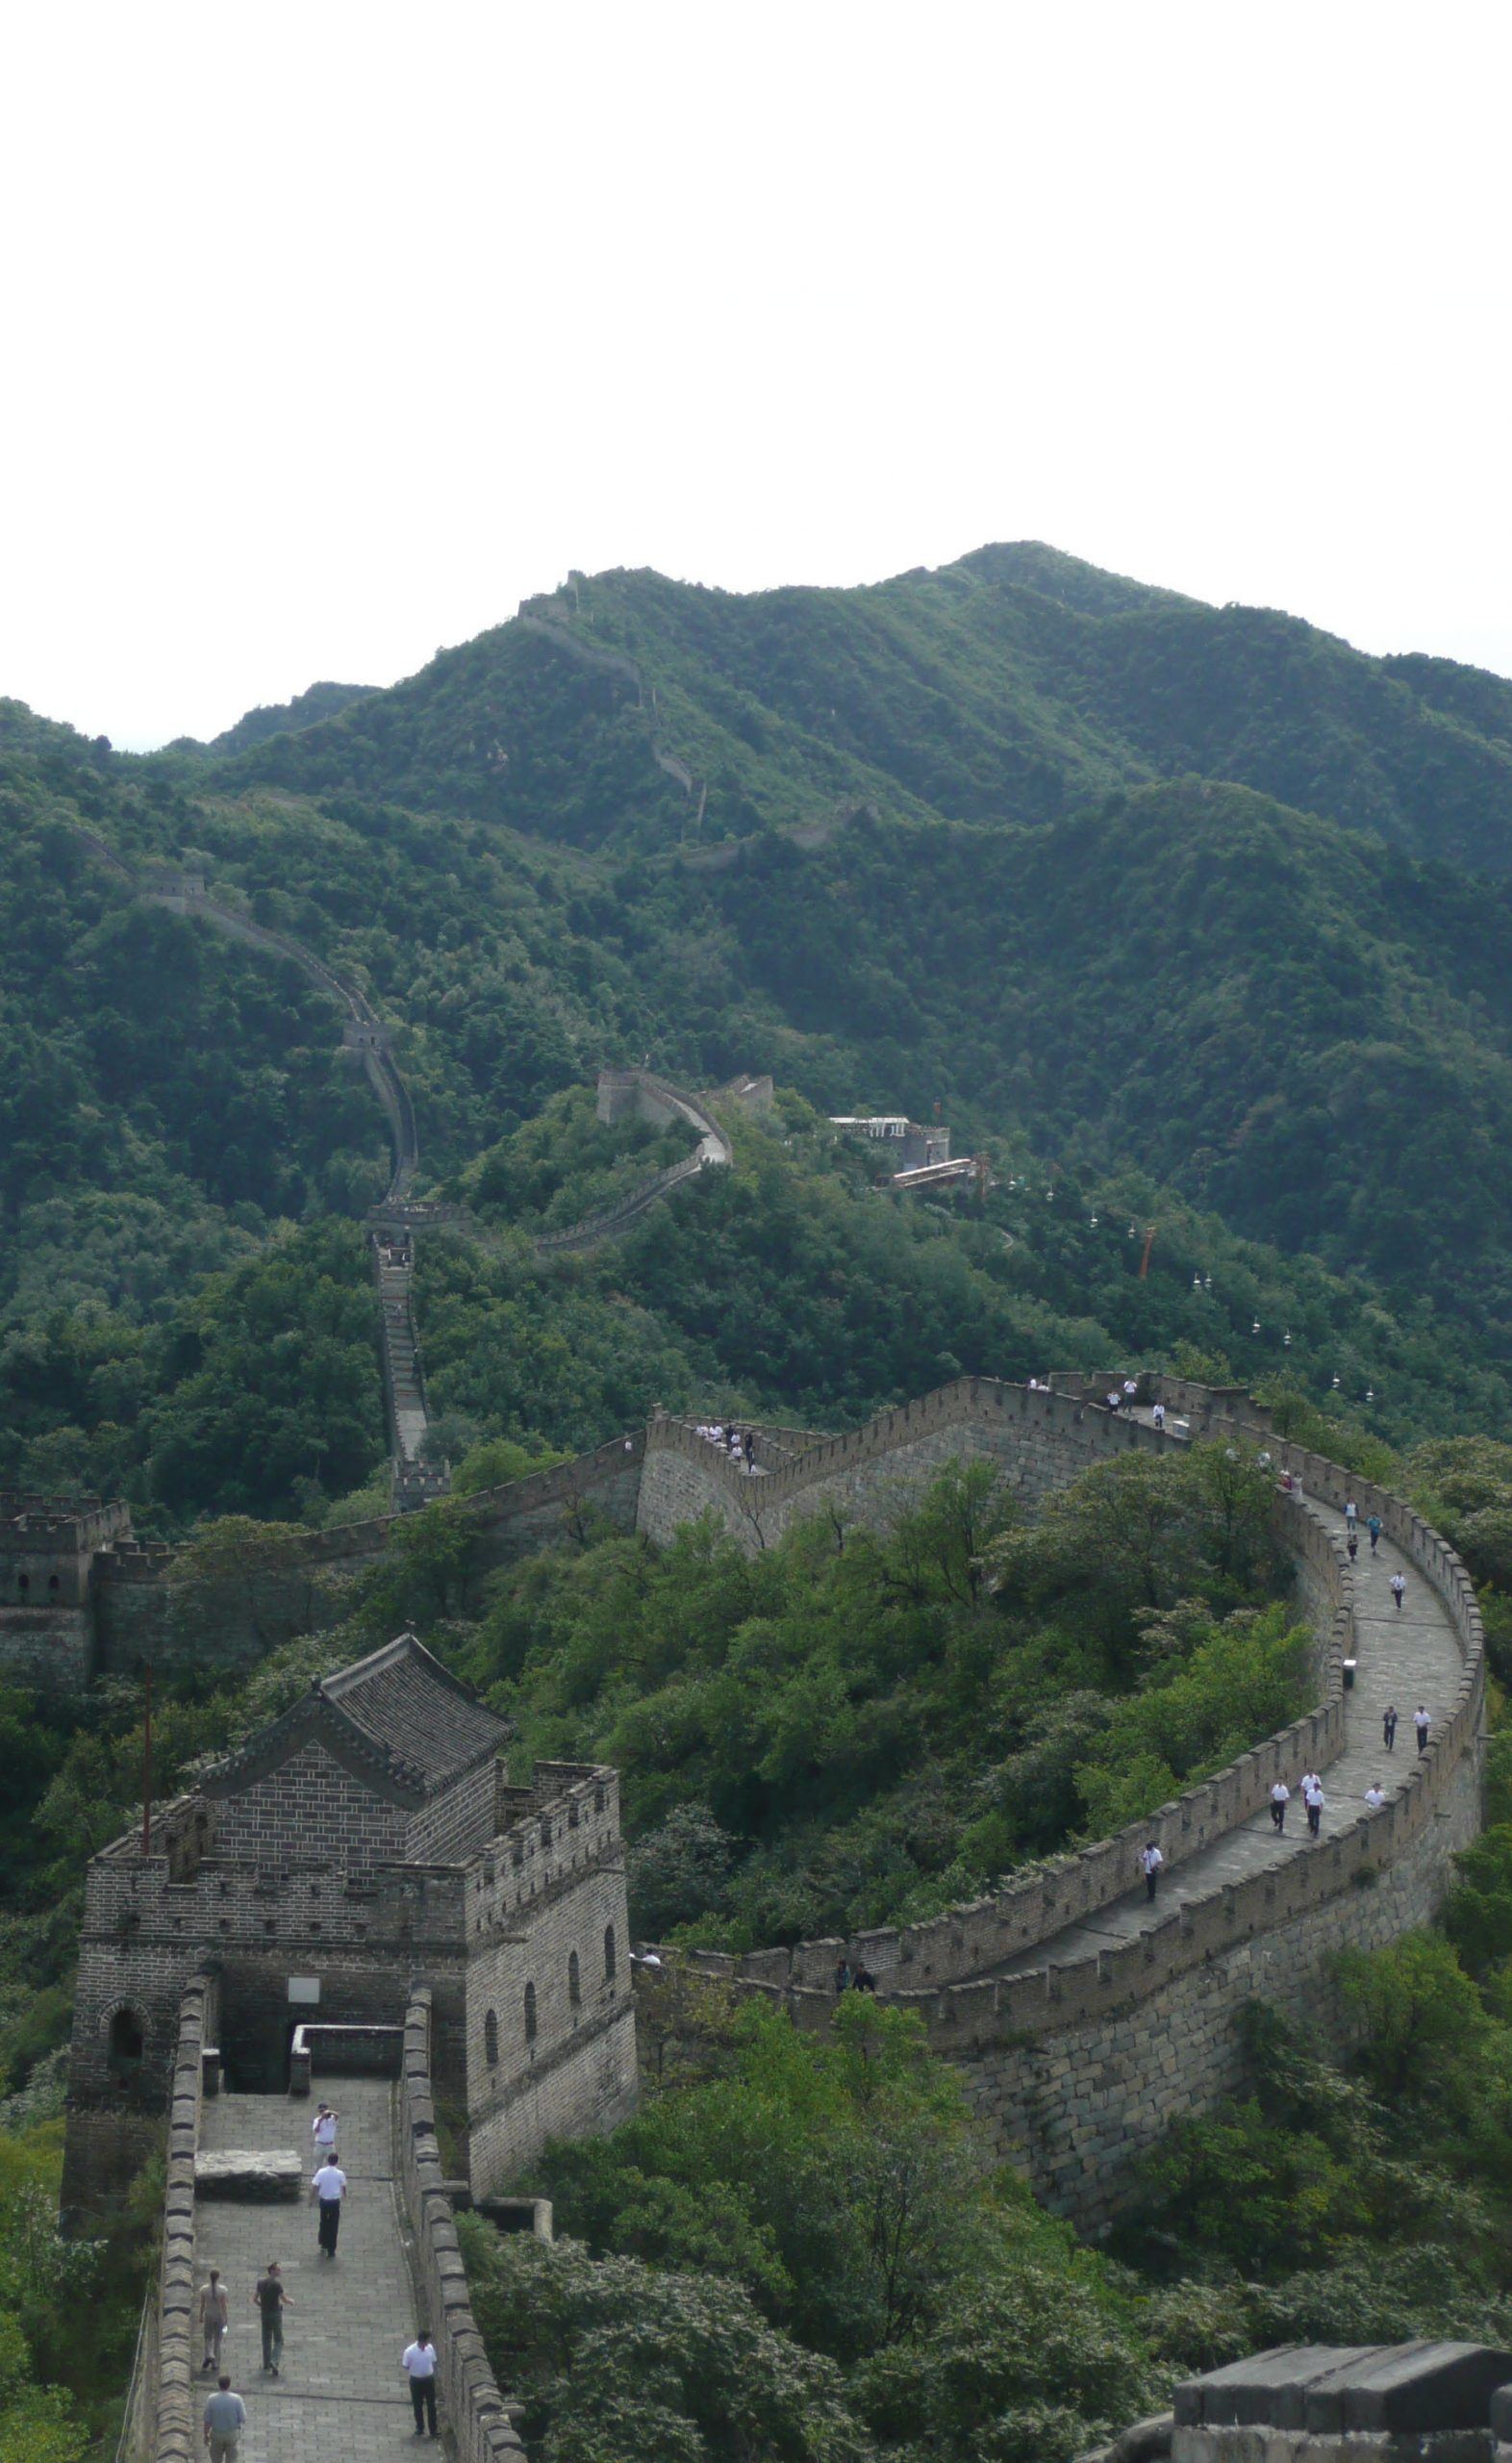 A section of The Great Wall of China